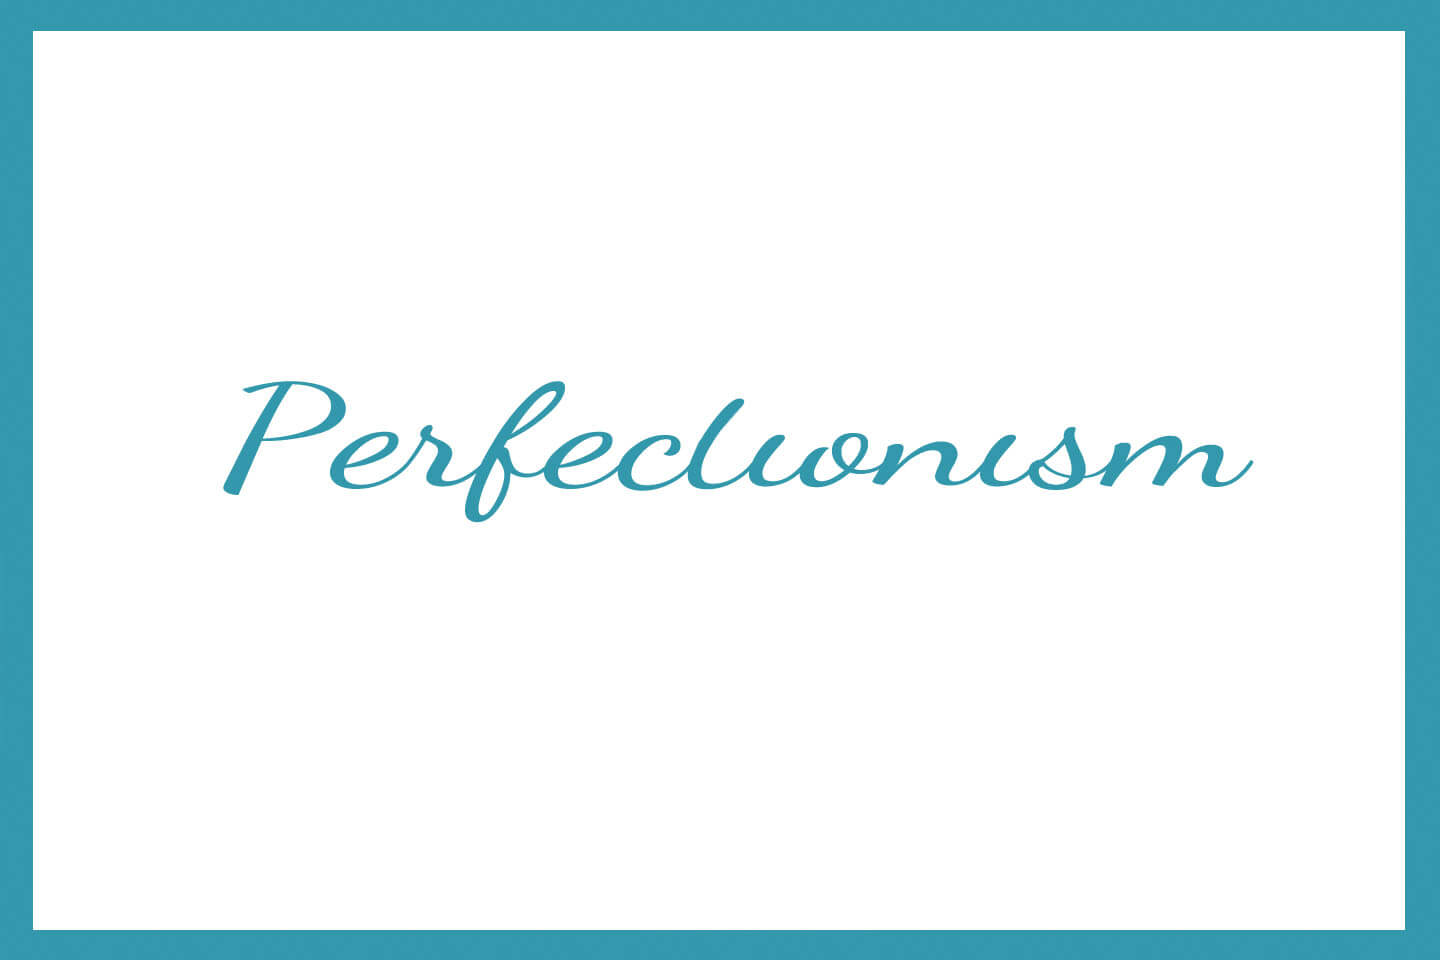 Cursive text reads "Perfectionism." The i's are not dotted in the text and the t is not crossed.